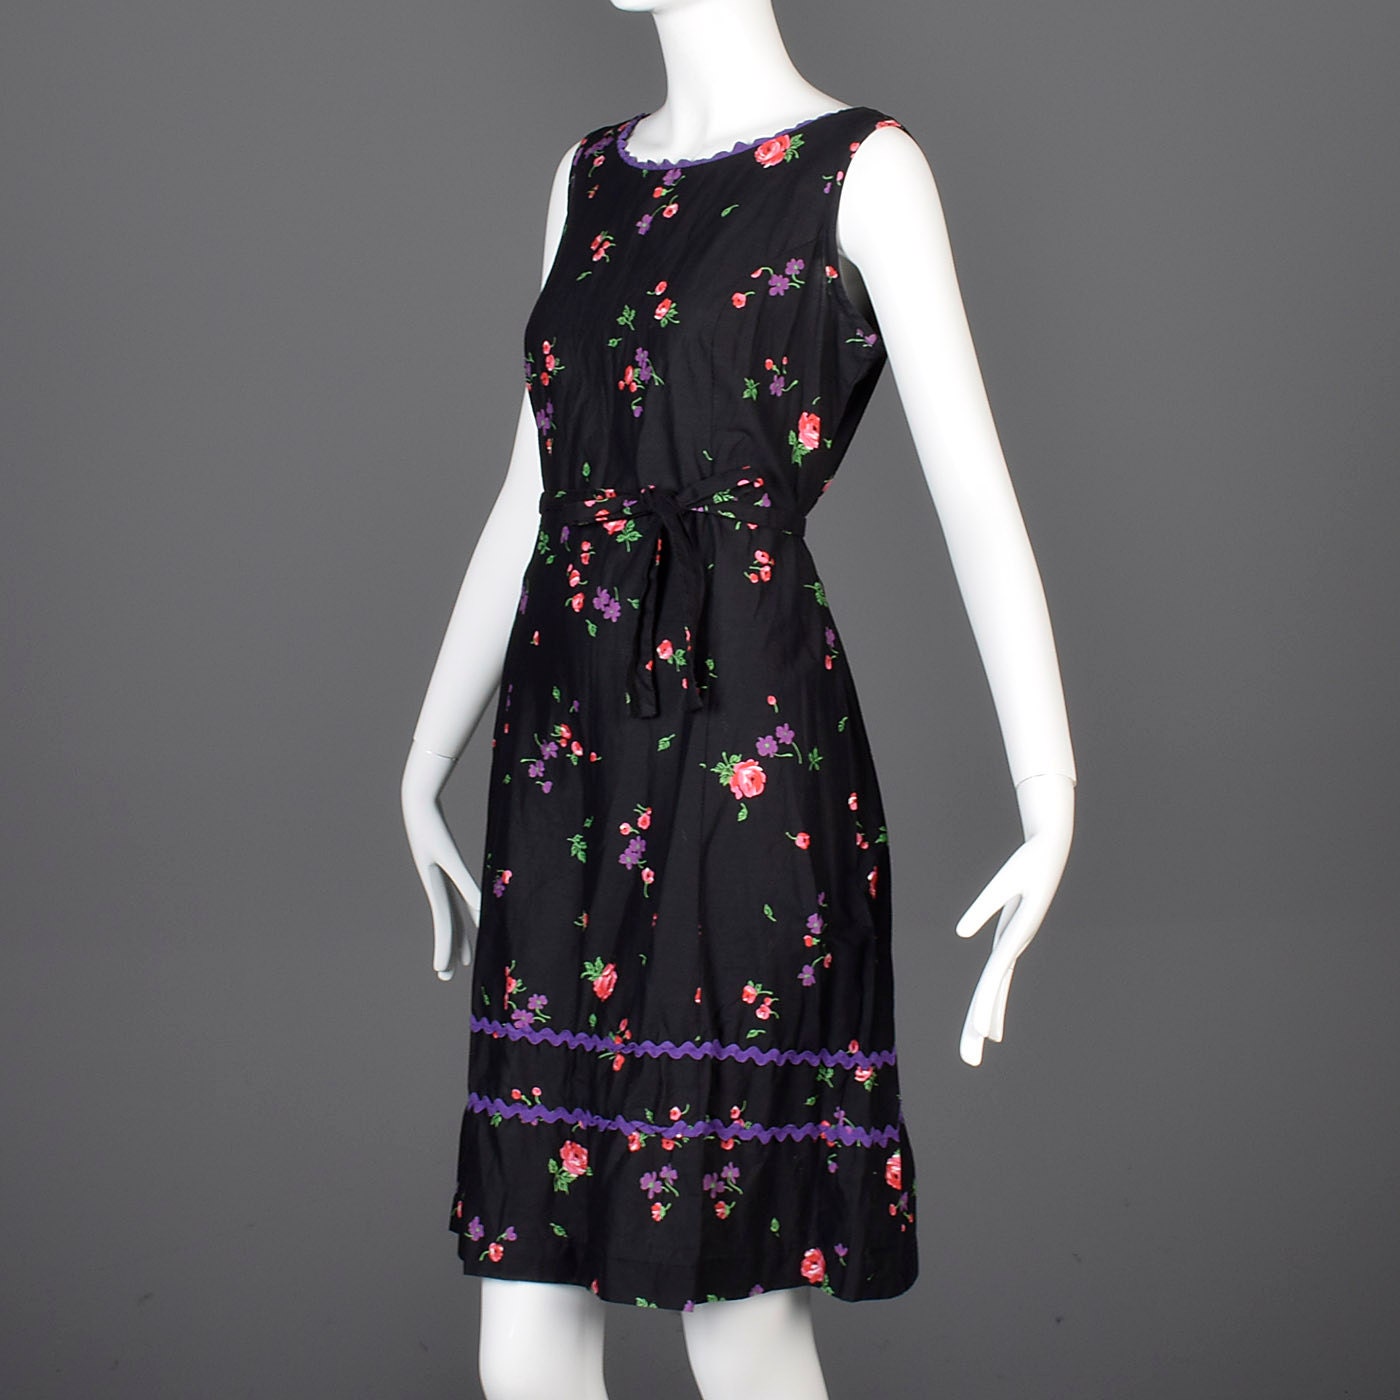 L 1960s Black Floral Dress Sleeveless Casual Summer Cotton Mid Century ...